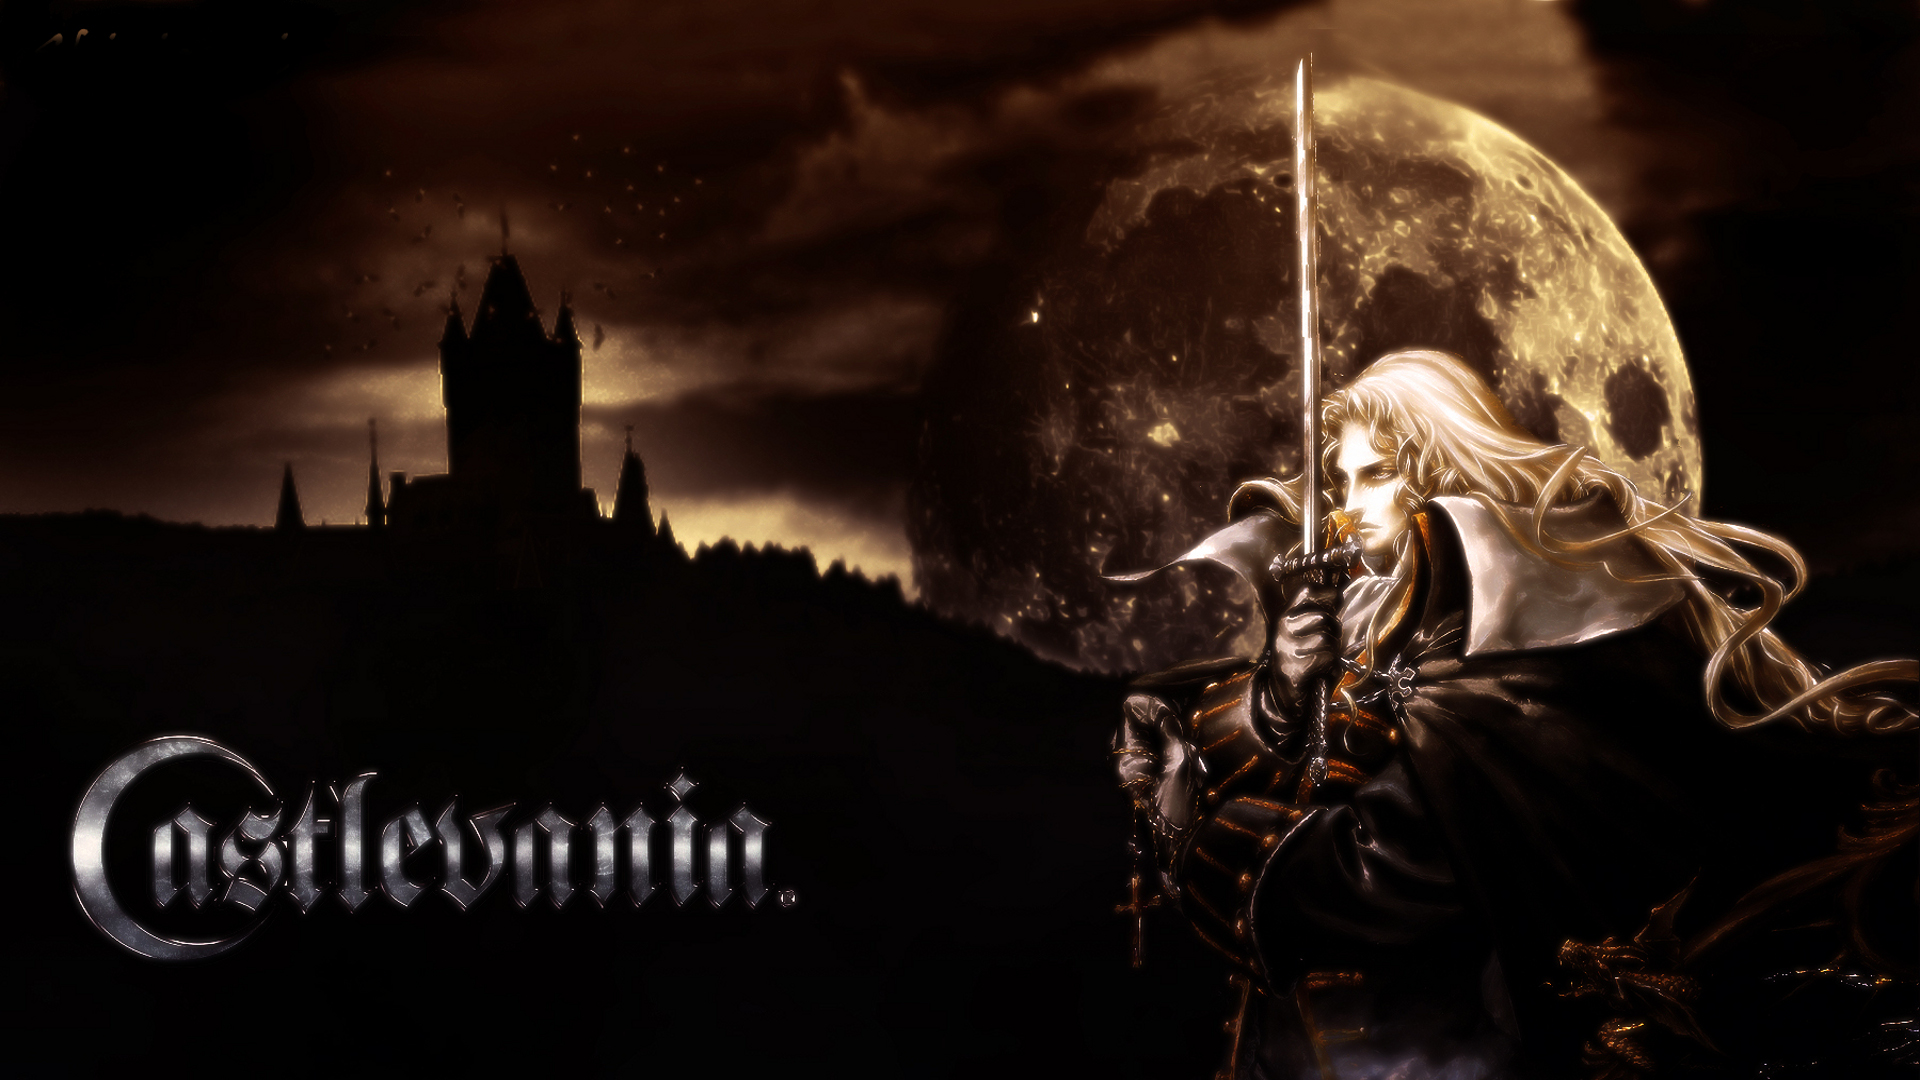 Castlevania Symphony Of The Night Full HD Wallpaper And